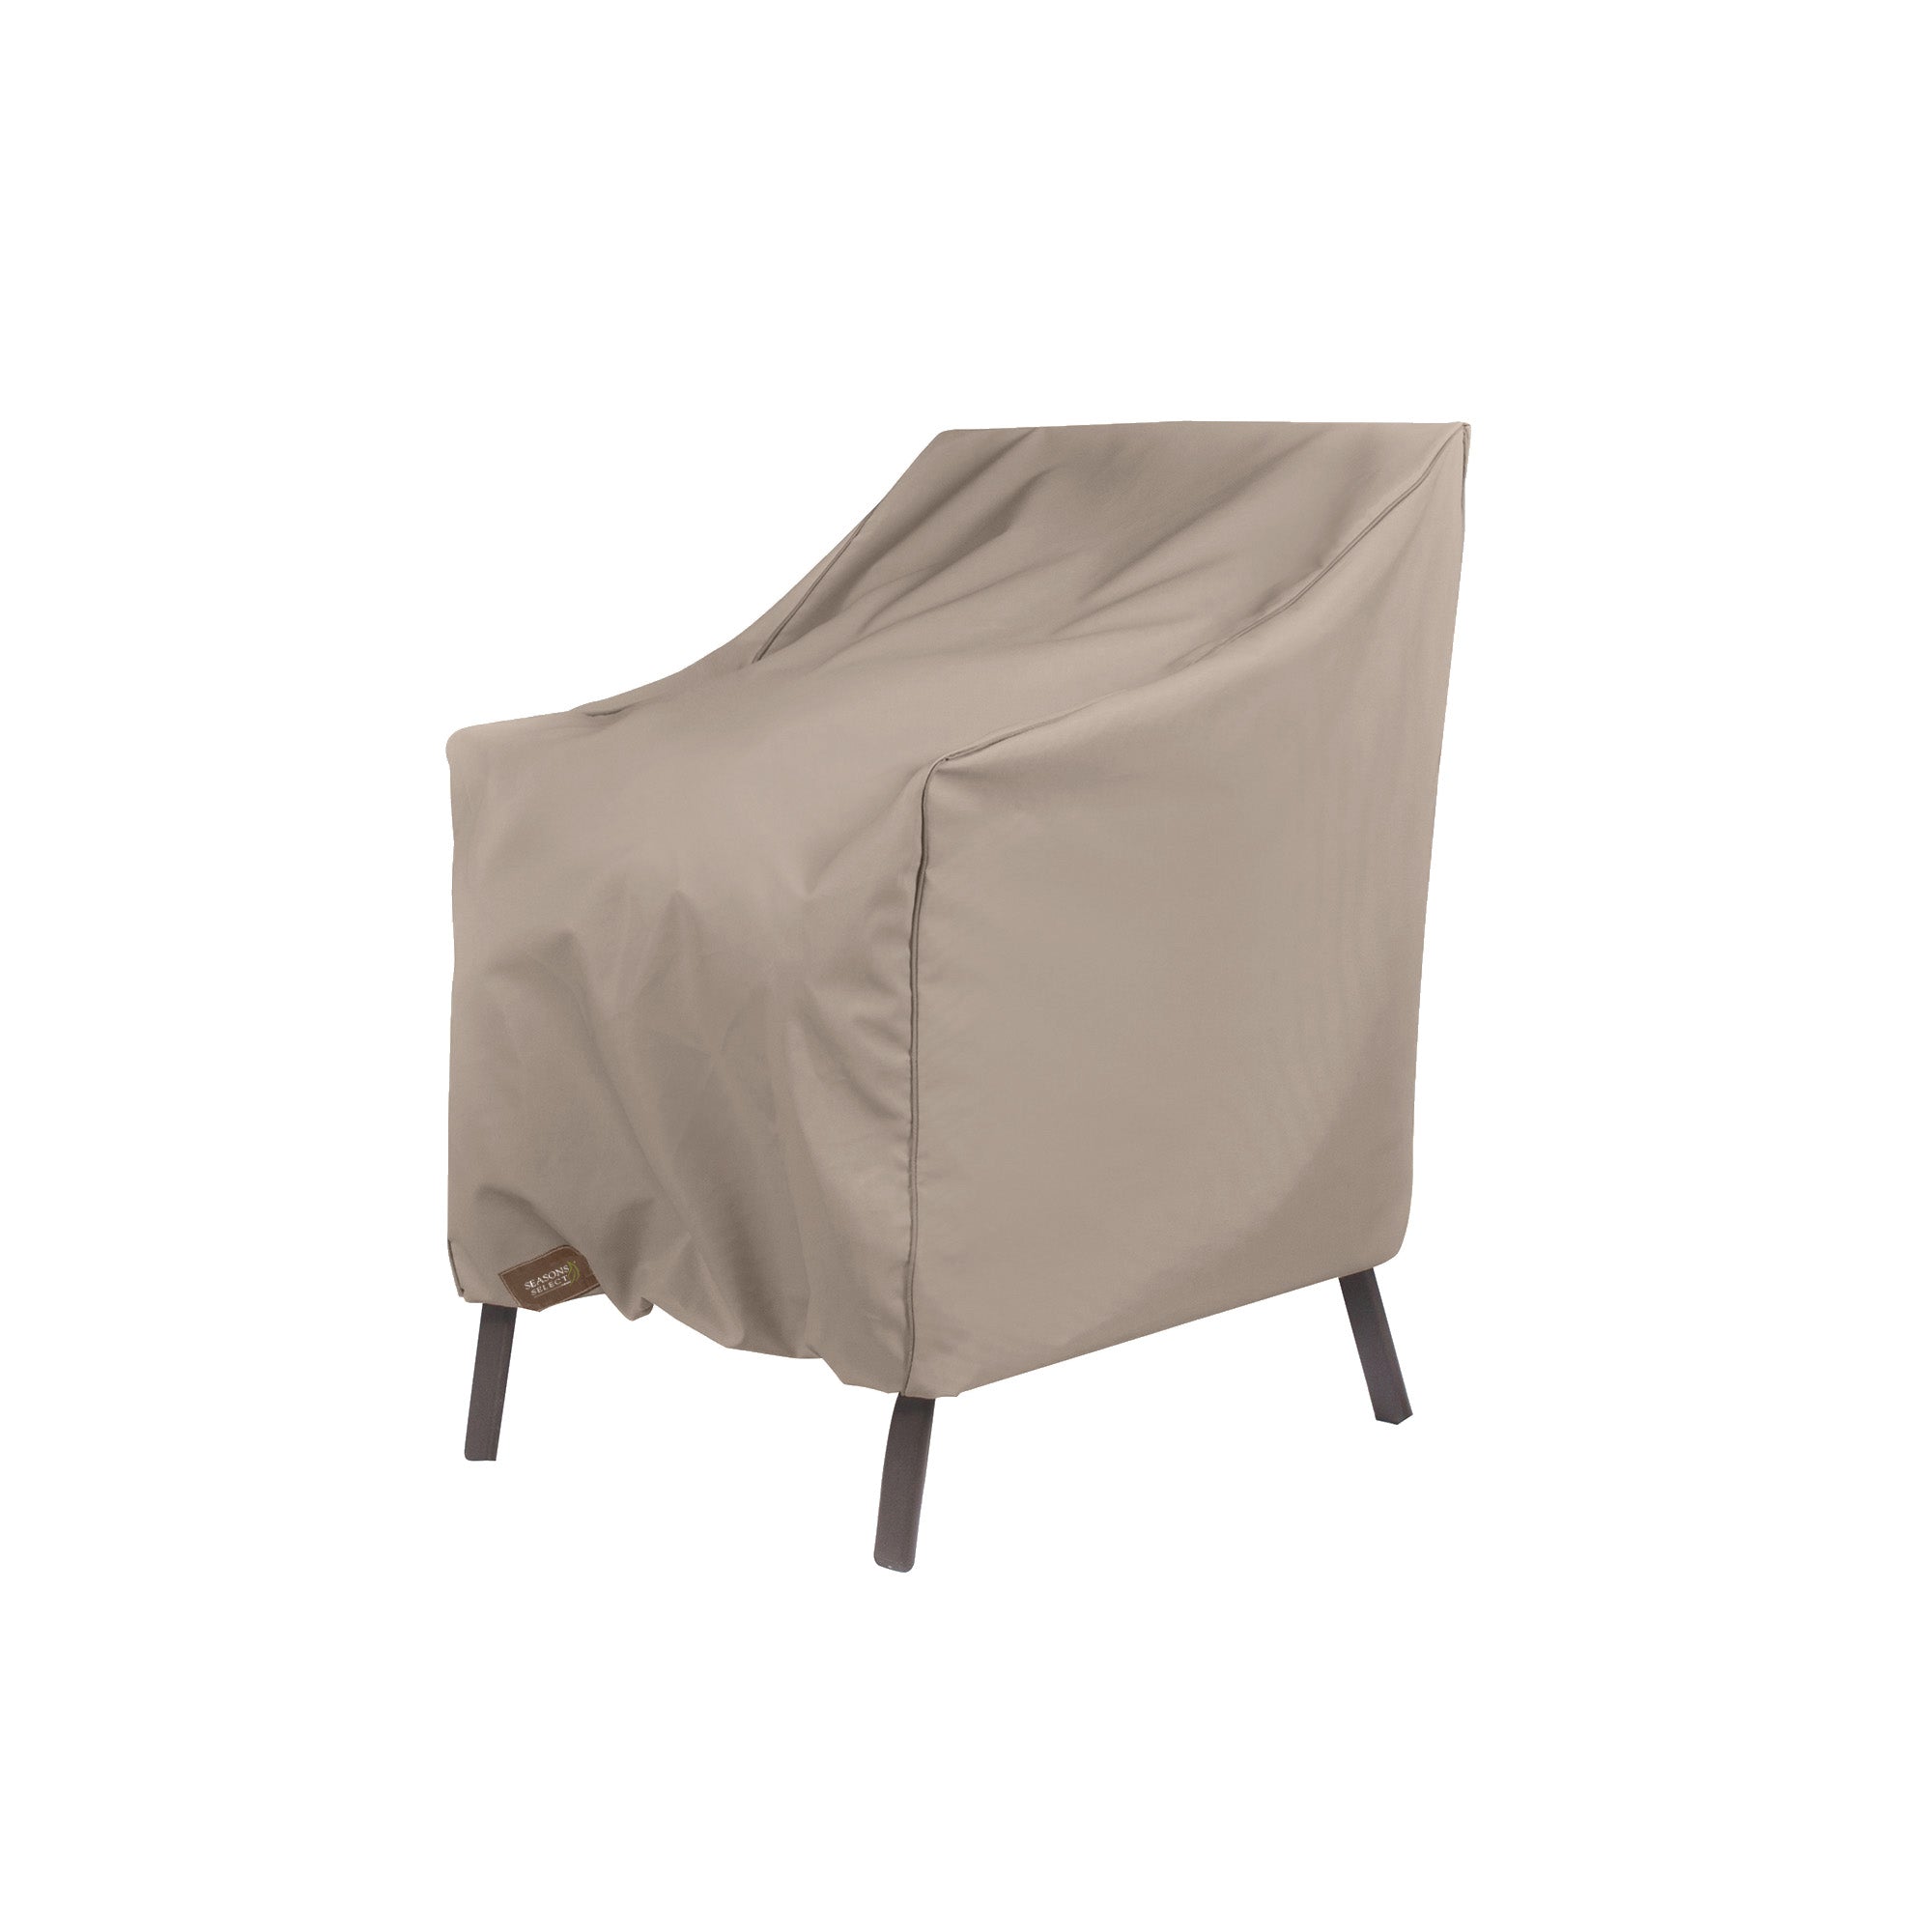 High Back Patio Chair Cover